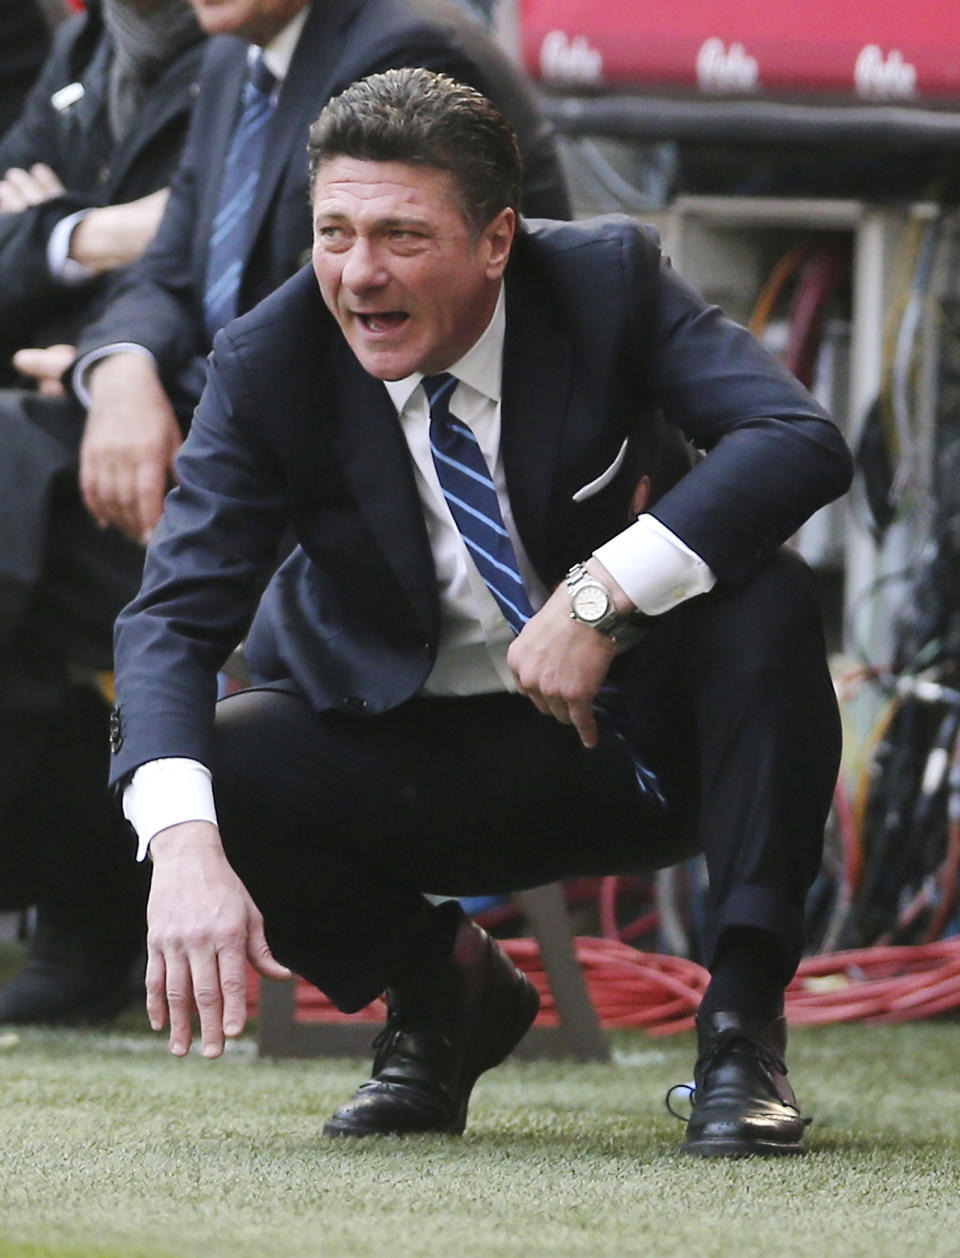 Inter Milan coach Walter Mazzarri looks the match during the Serie A soccer match between Inter Milan and Torino at the San Siro stadium in Milan, Italy, Sunday, March 9, 2014. (AP Photo/Antonio Calanni)